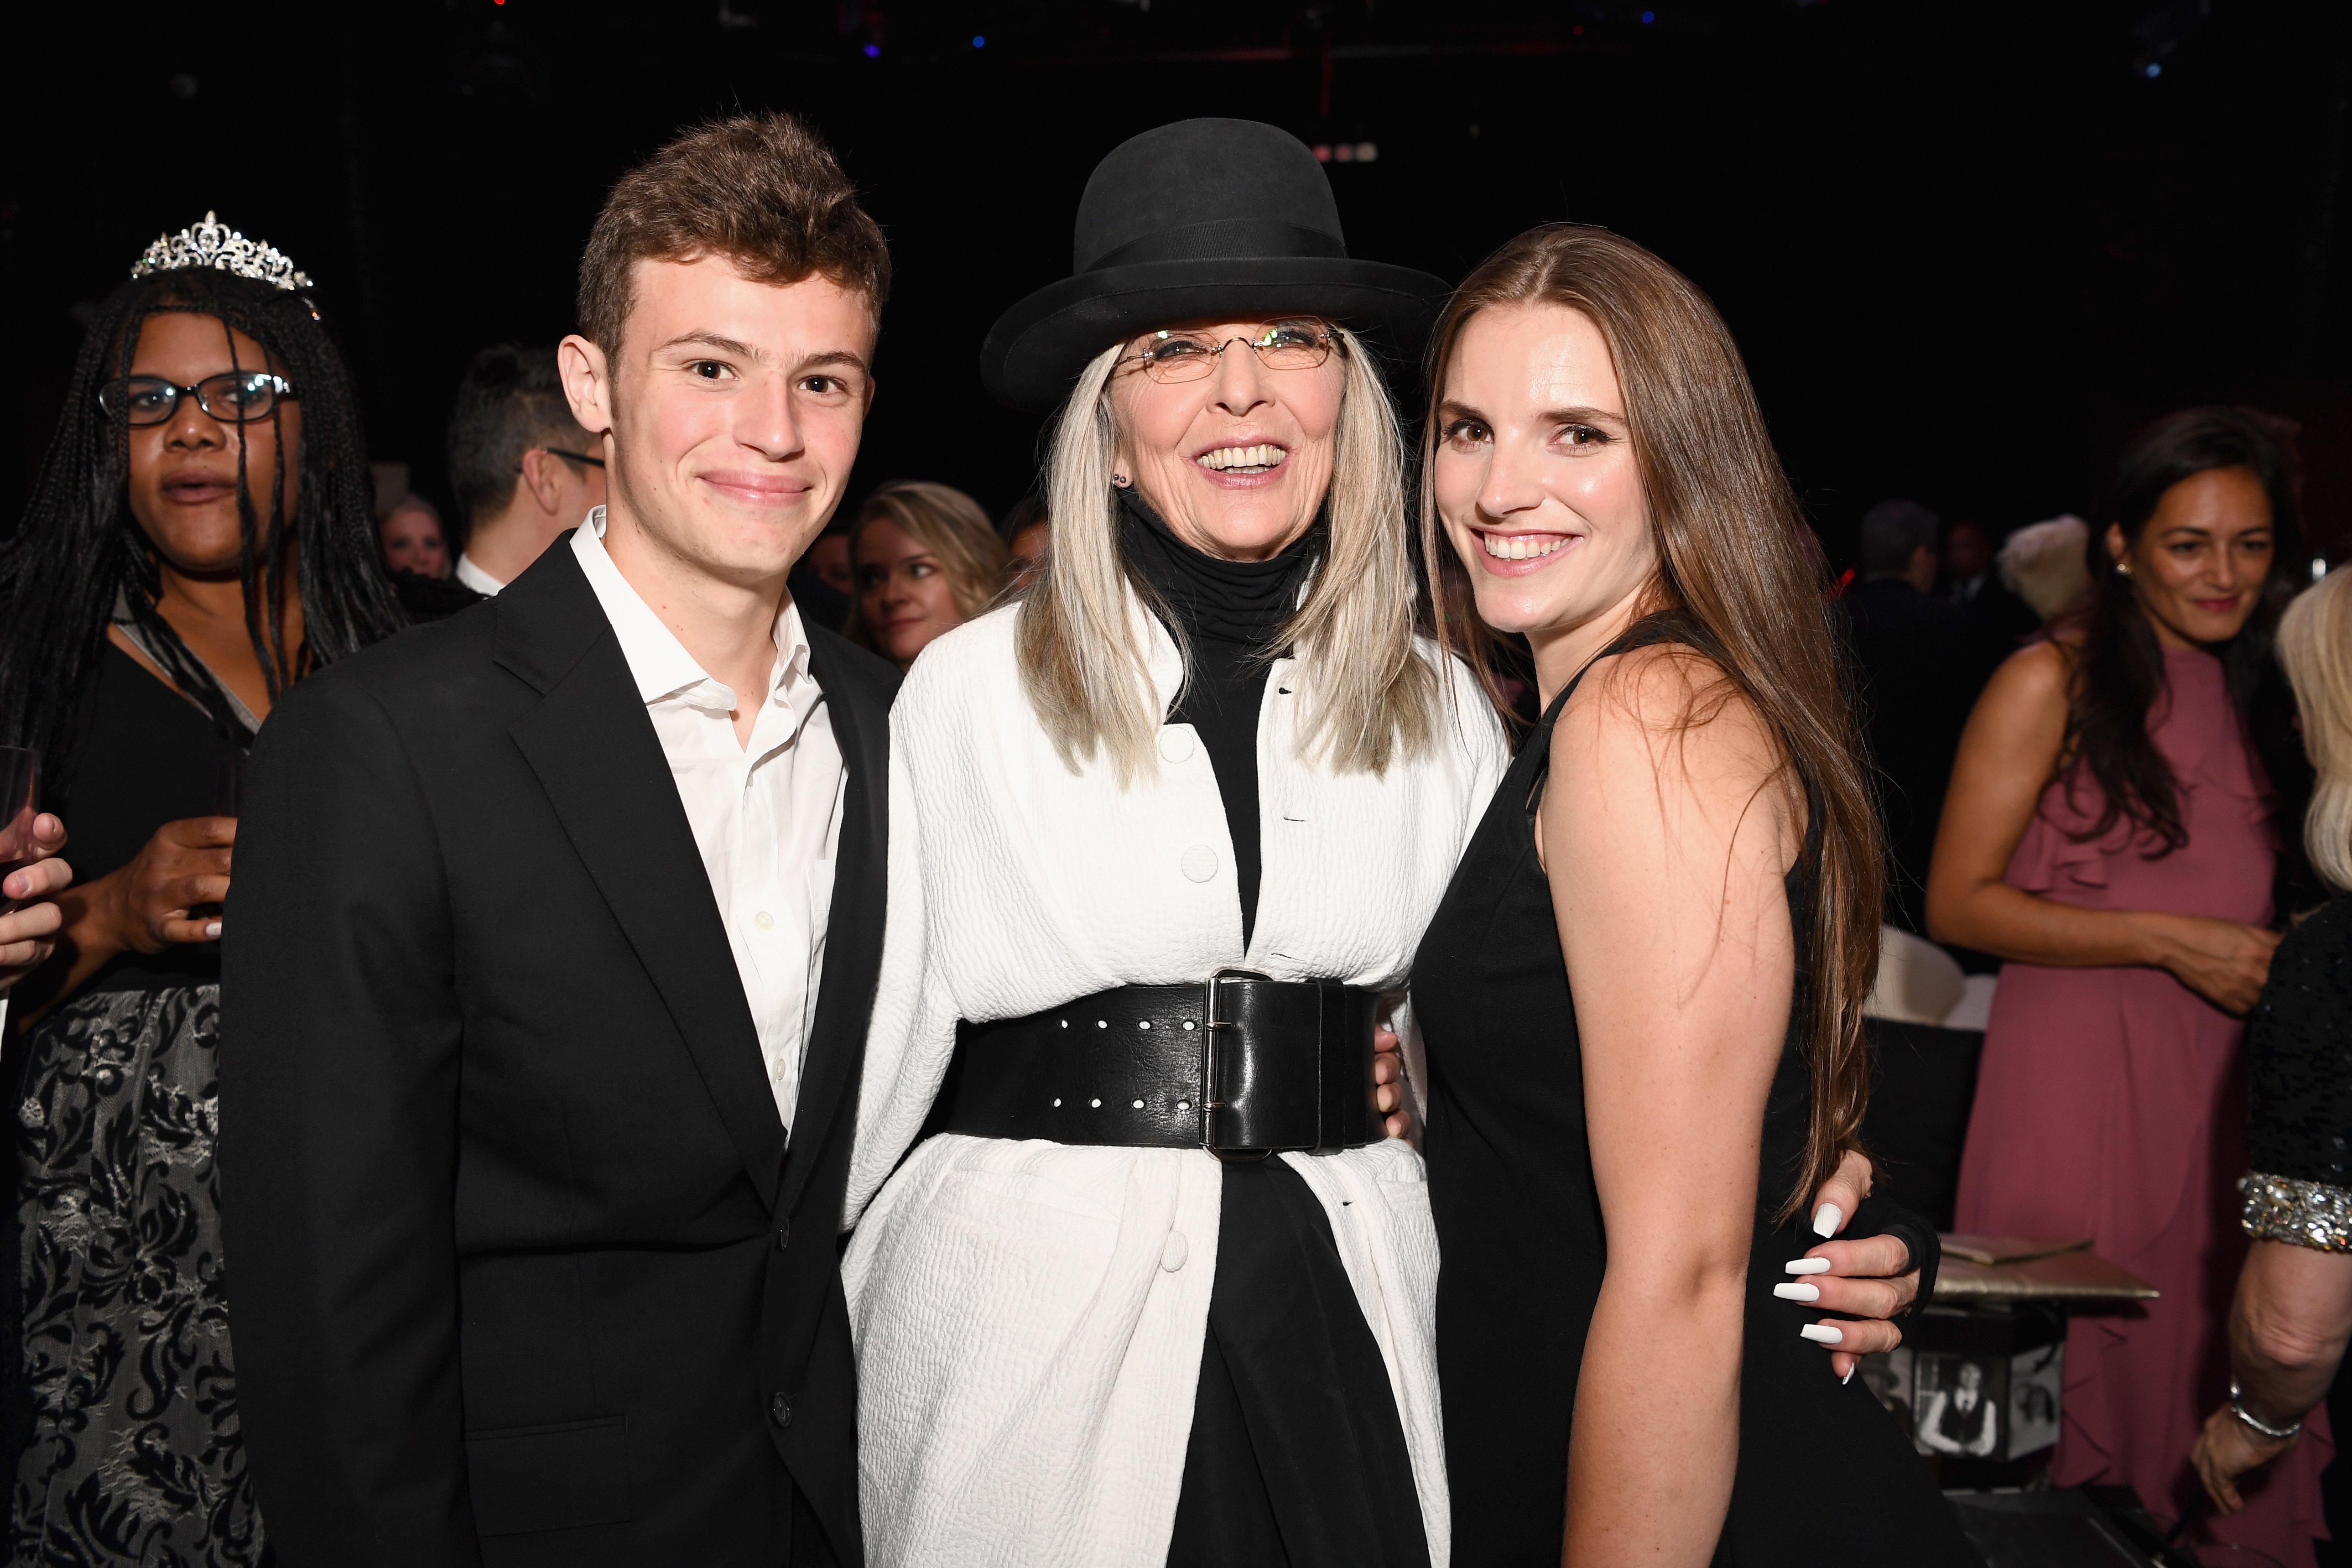 Duke Keaton, Honoree Diane Keaton and Dexter Keaton at the after party for American Film Institute's 45th Life Achievement Award Gala Tribute to Diane Keaton at OHM Nightclub on June 8, 2017 in Hollywood, California. | Source: Getty Images